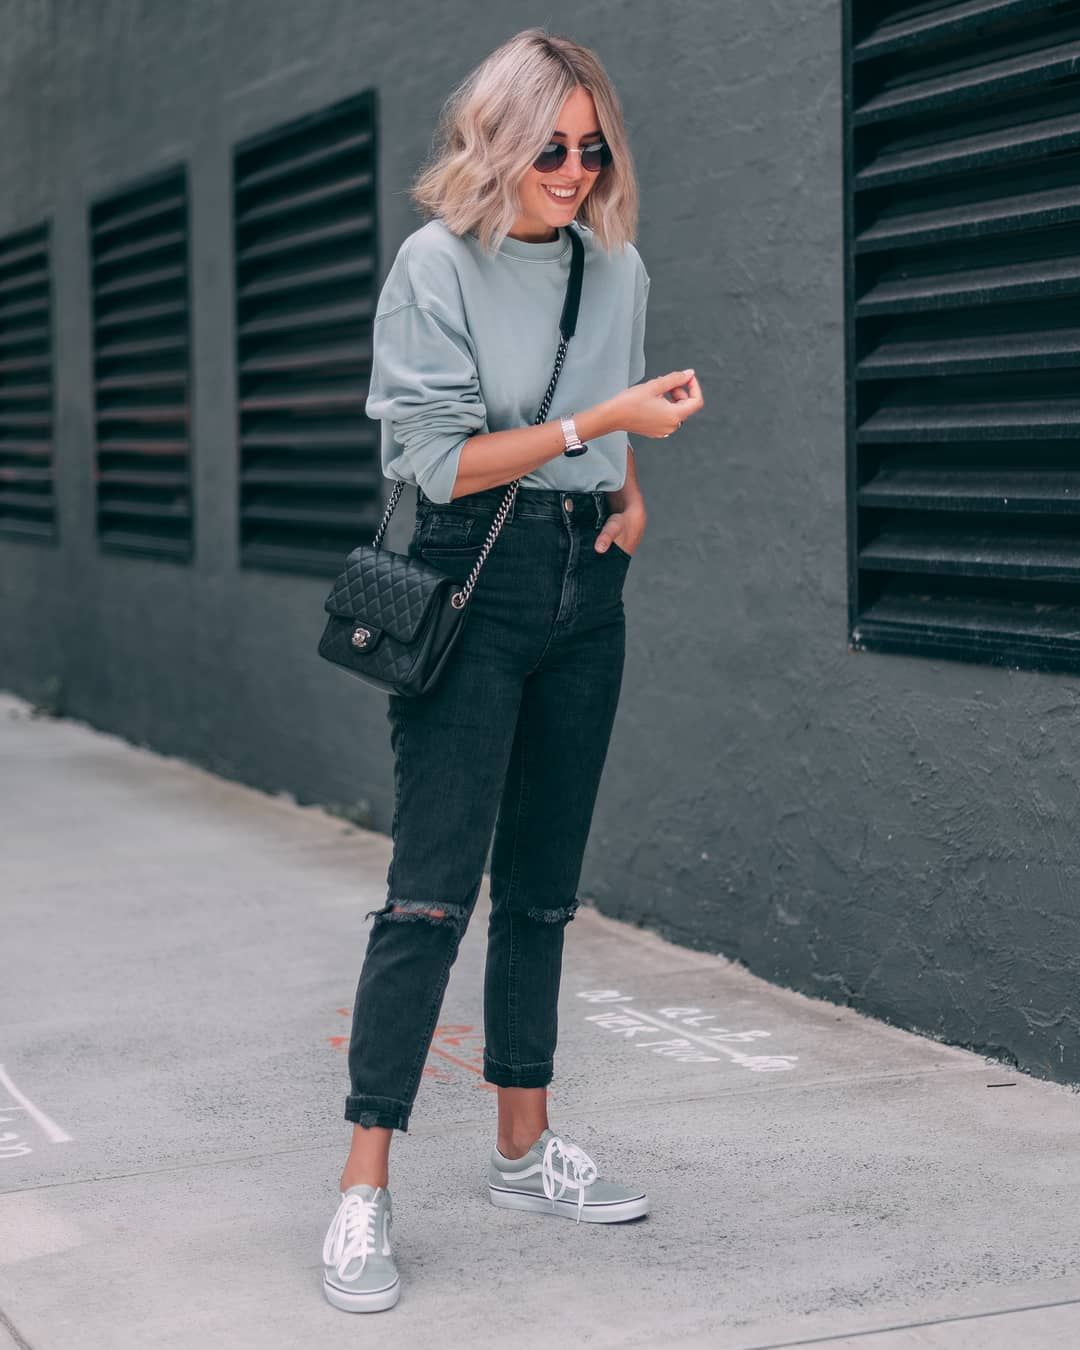 27 Casual Fall Outfits With Vans For Girls - Styleoholic